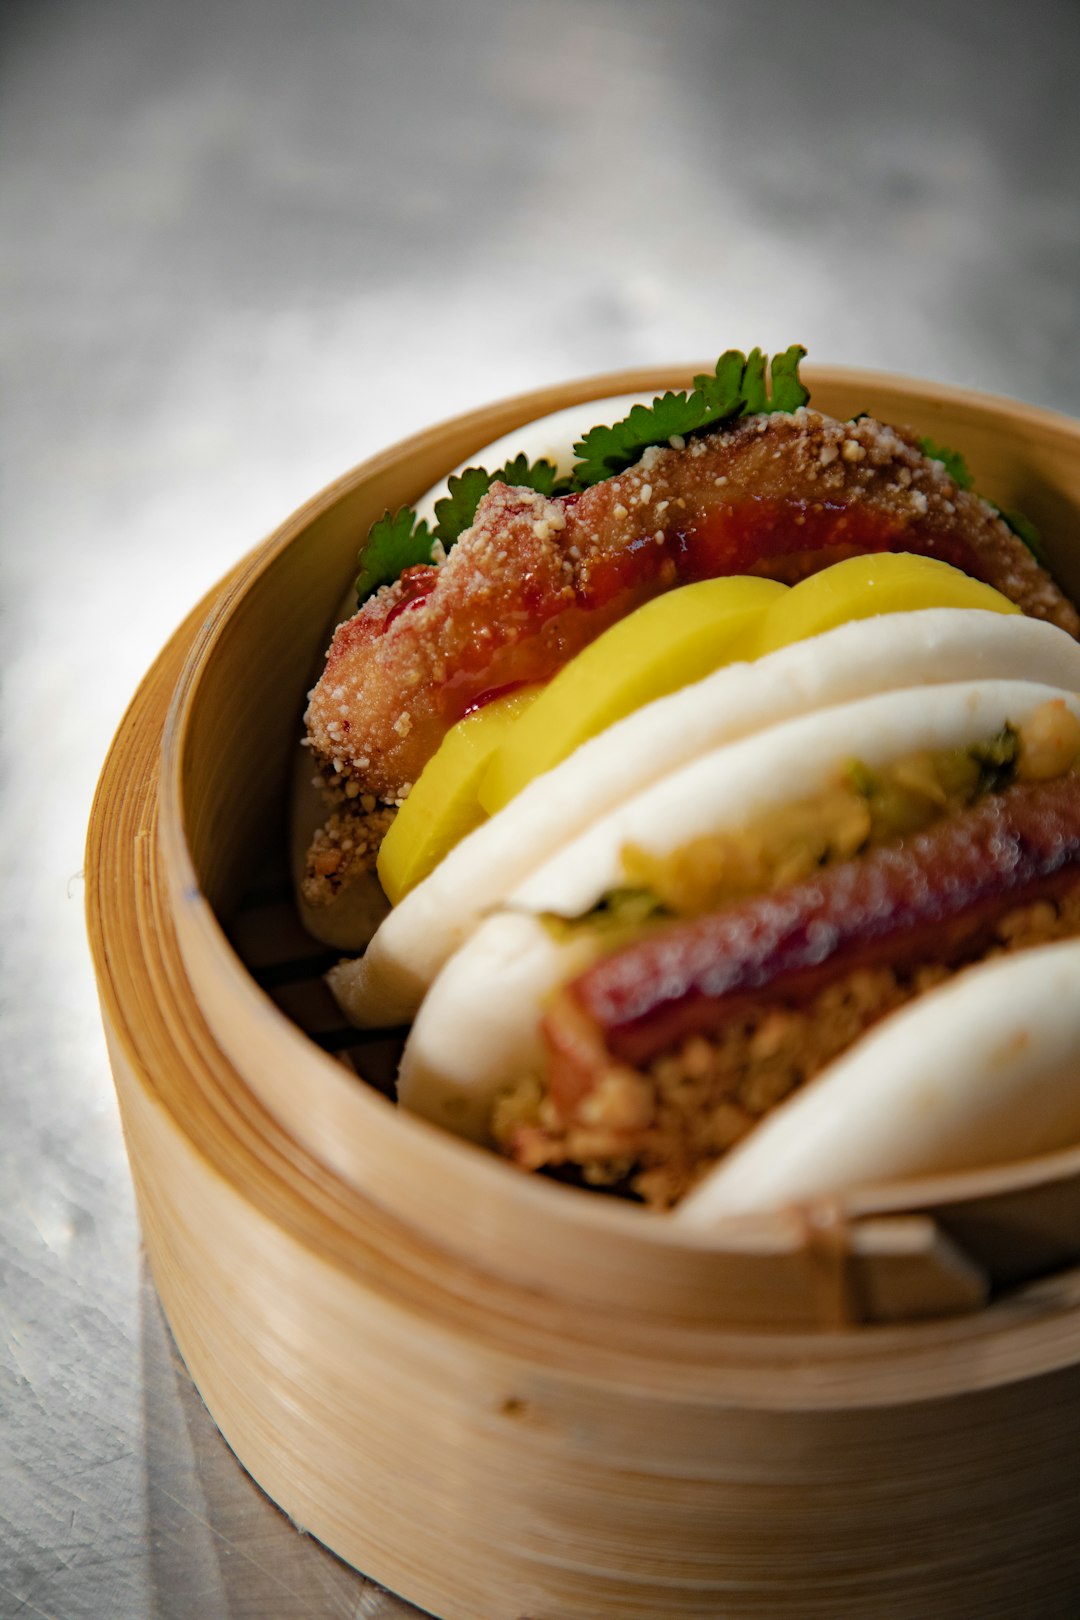 The Journey of the Beloved Chinese Delicacy – Baozi